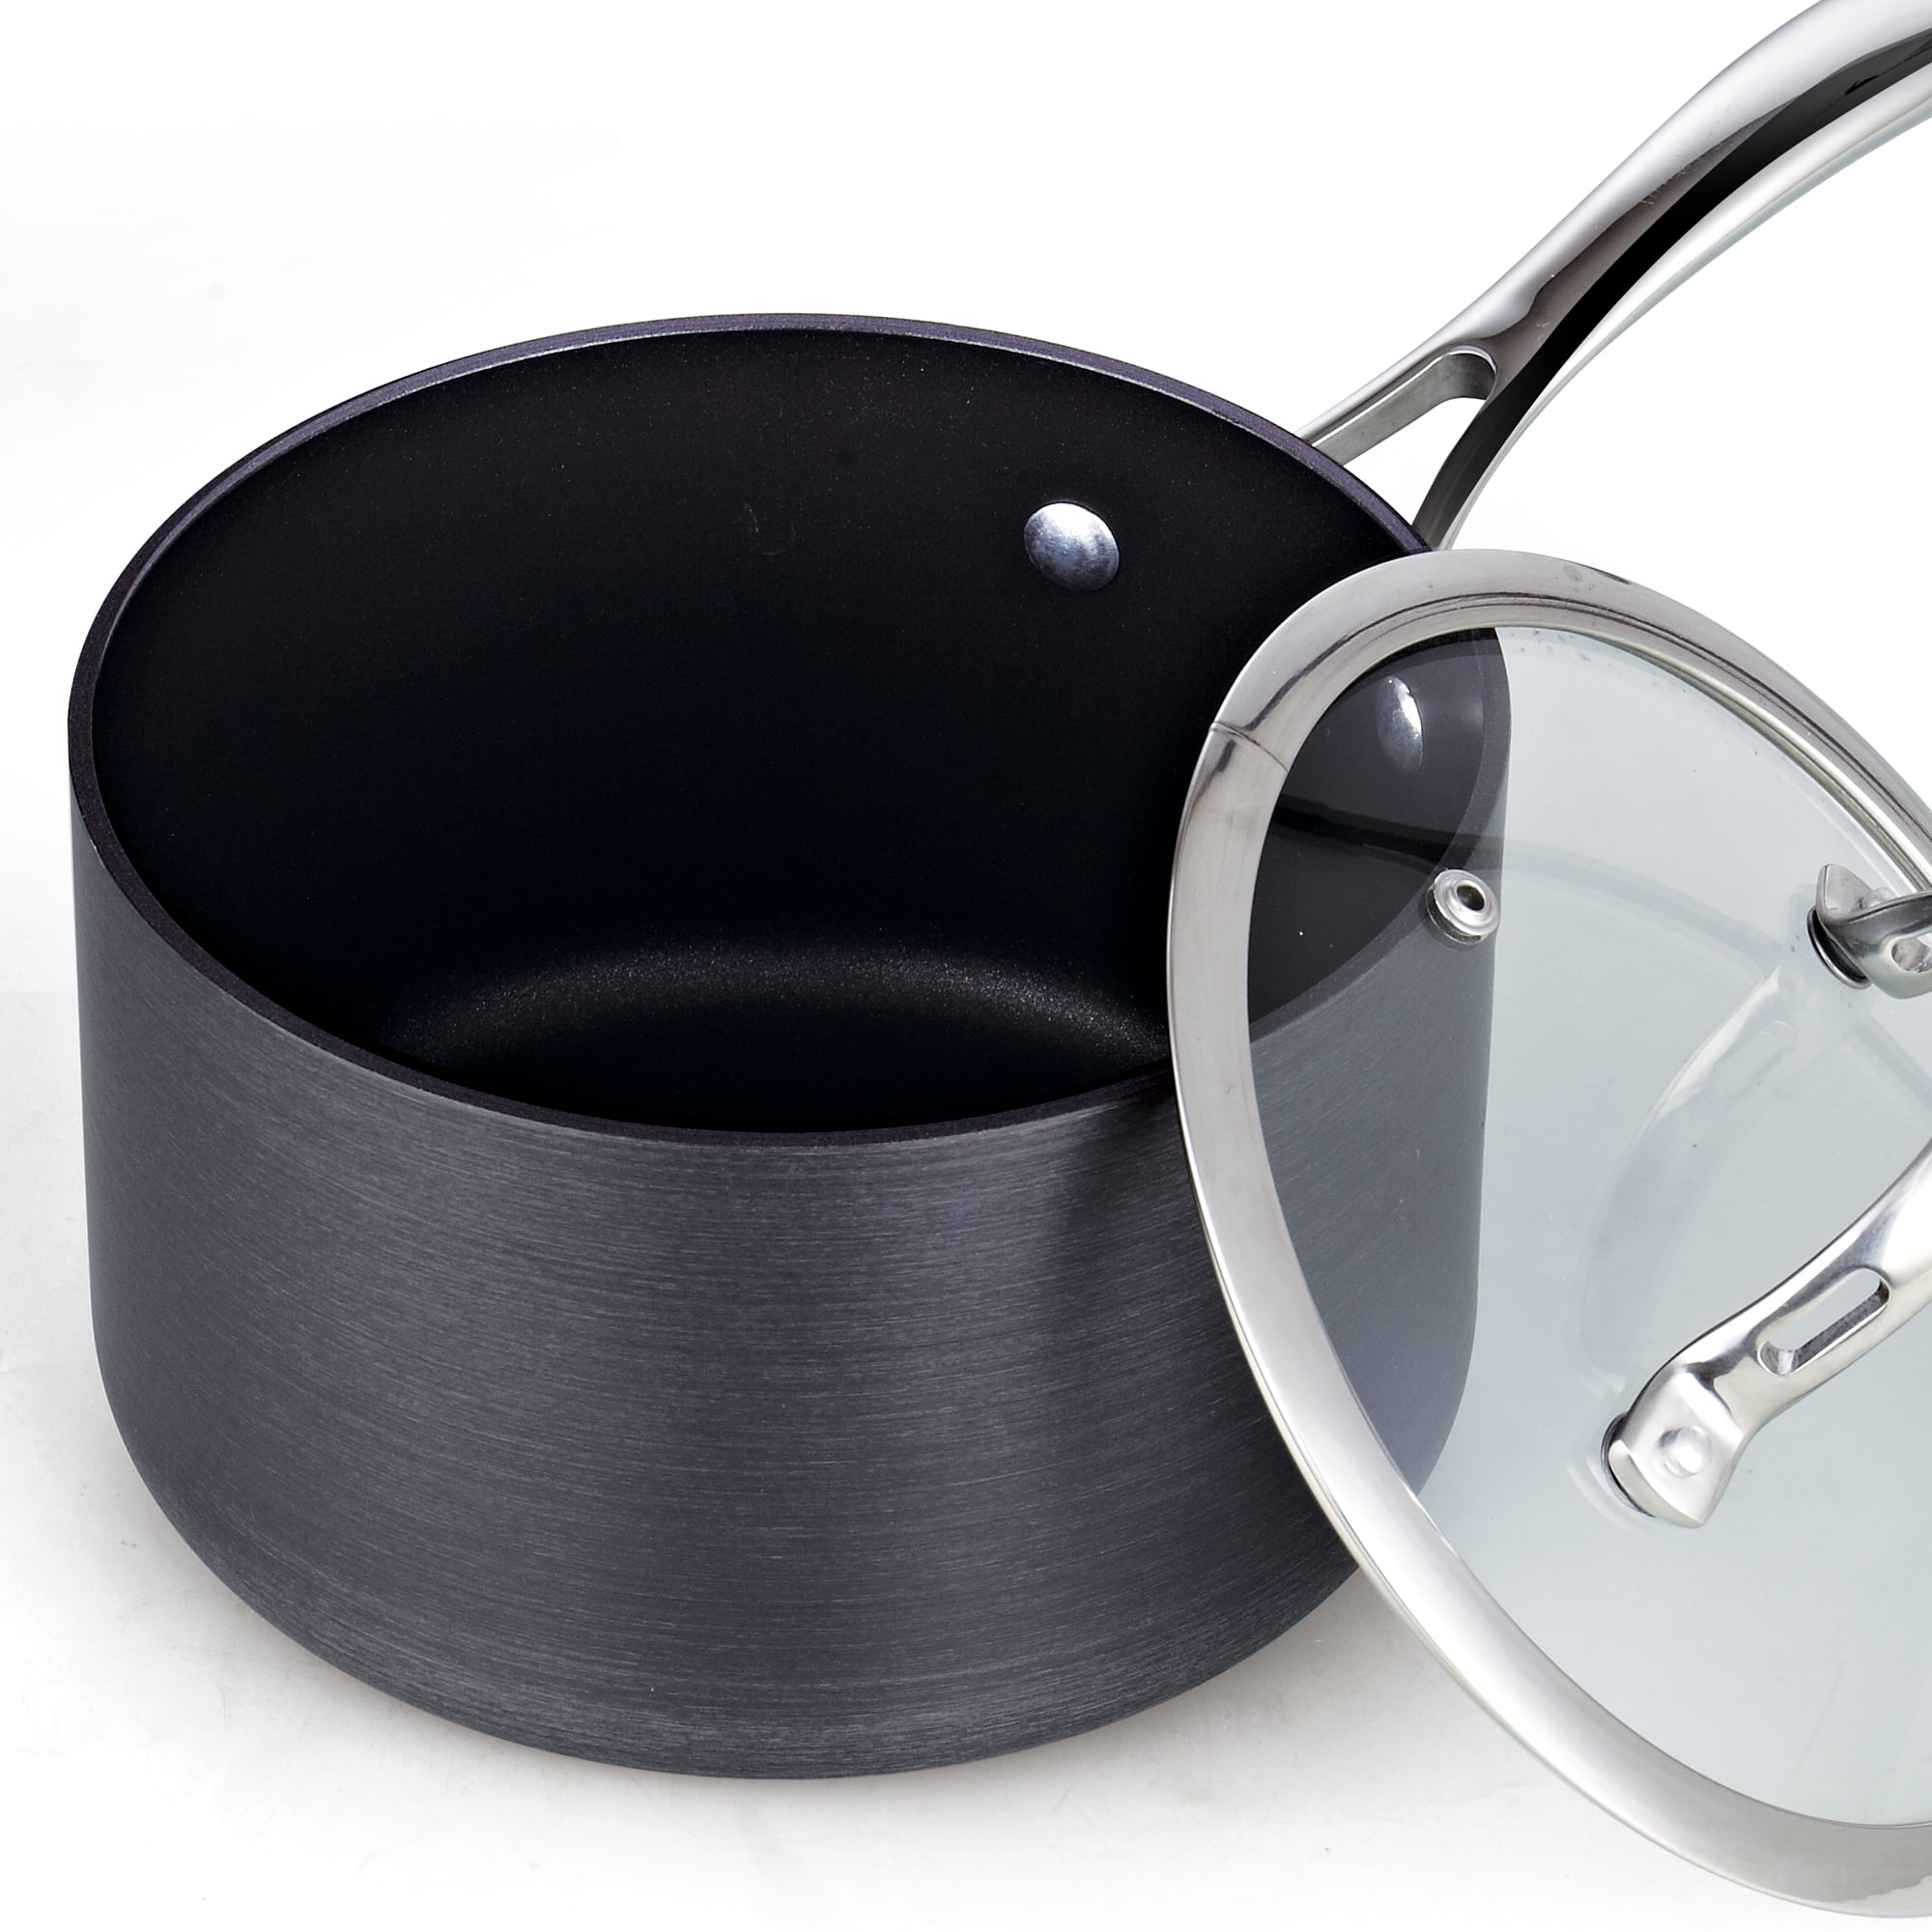 Cooks Standard 3-Quart Hard Anodized Nonstick Saucepan with Lid